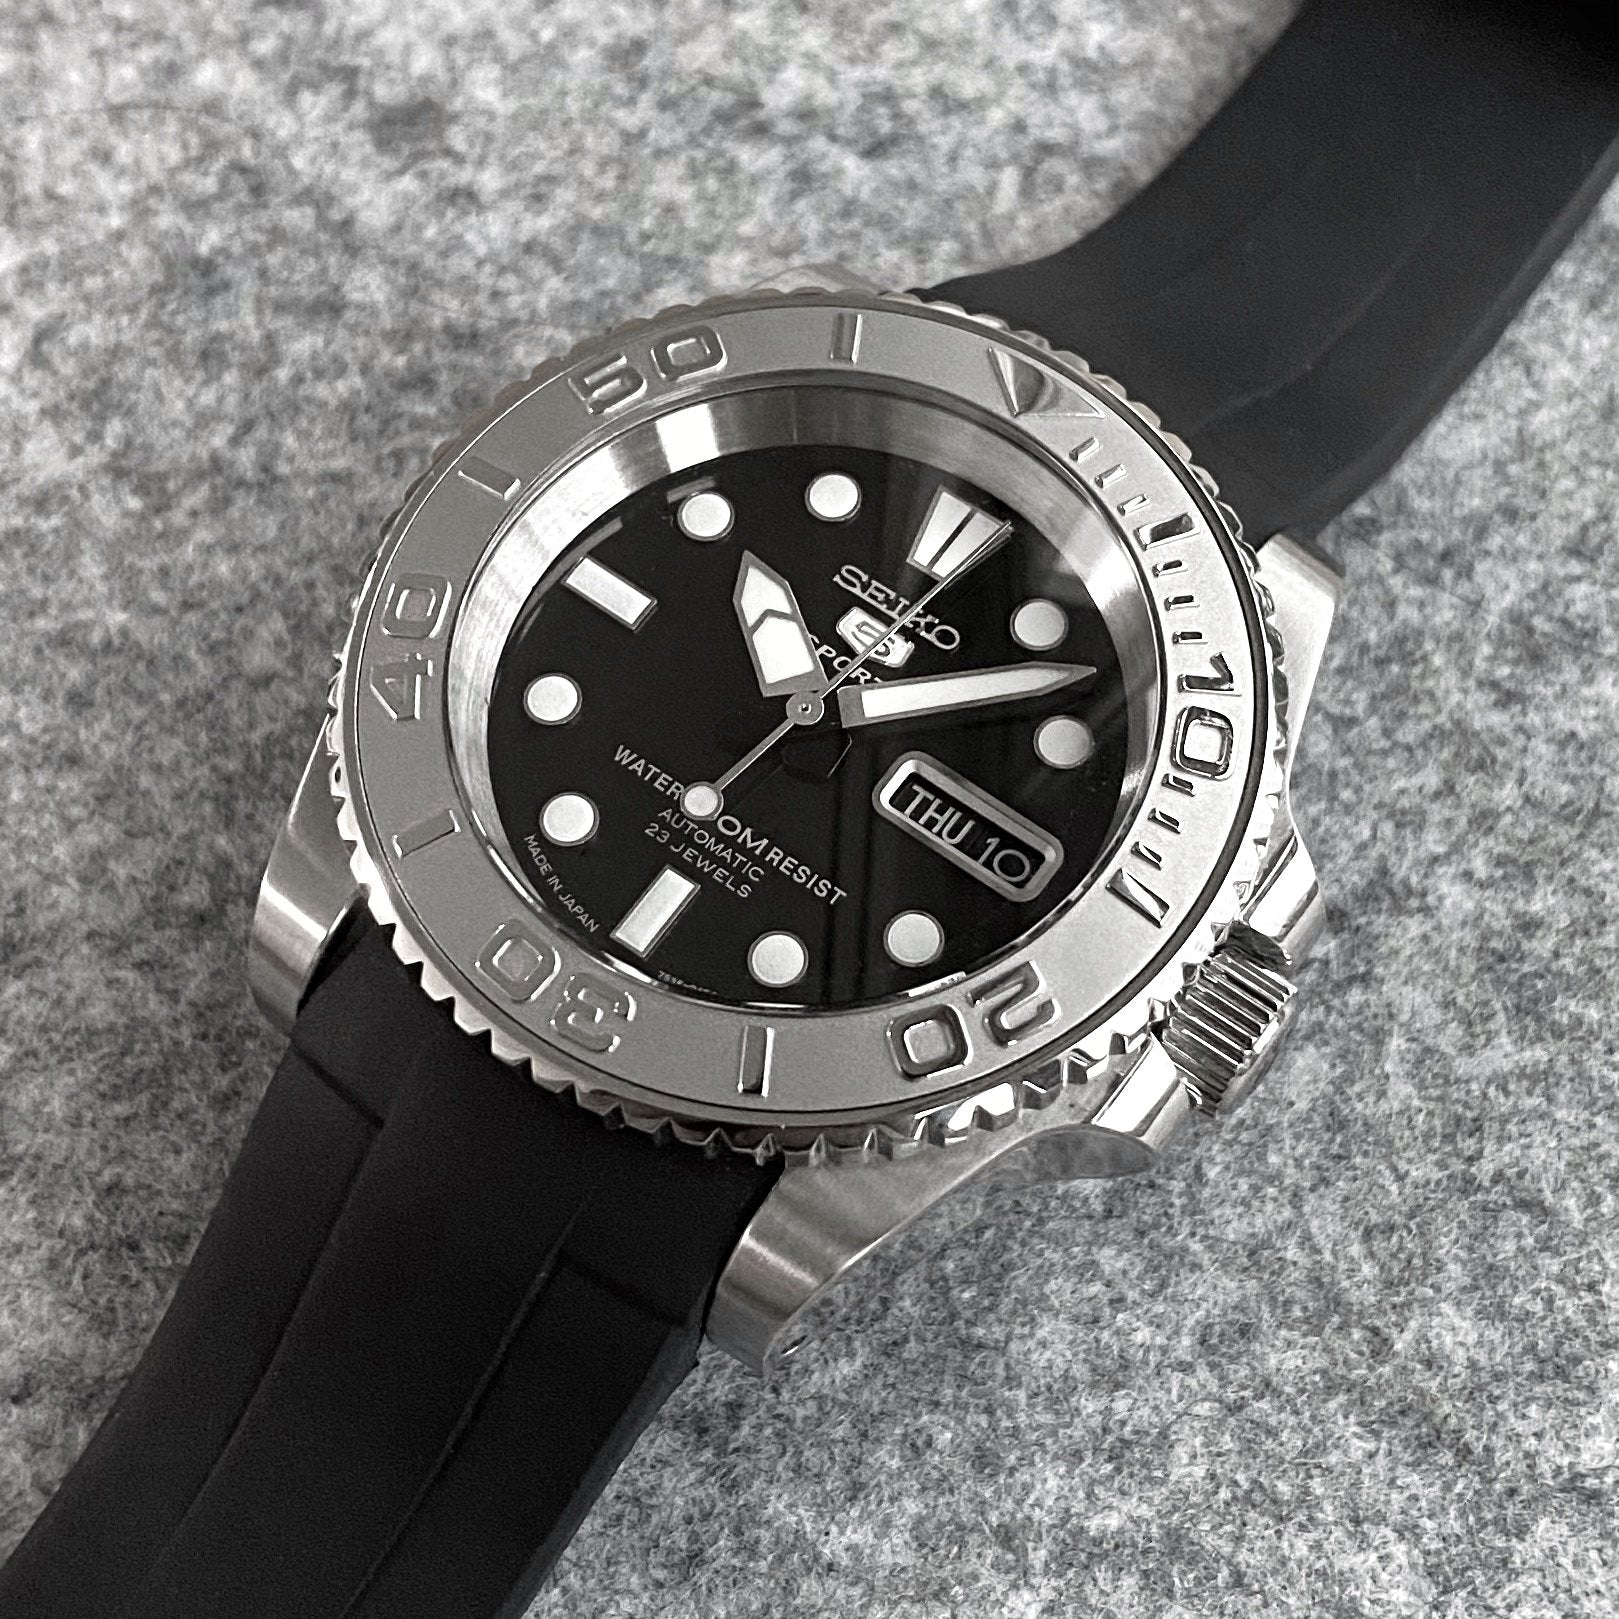 Case - SKX007 Sub - Polished Steel (With Case Back) - DLW WATCHES